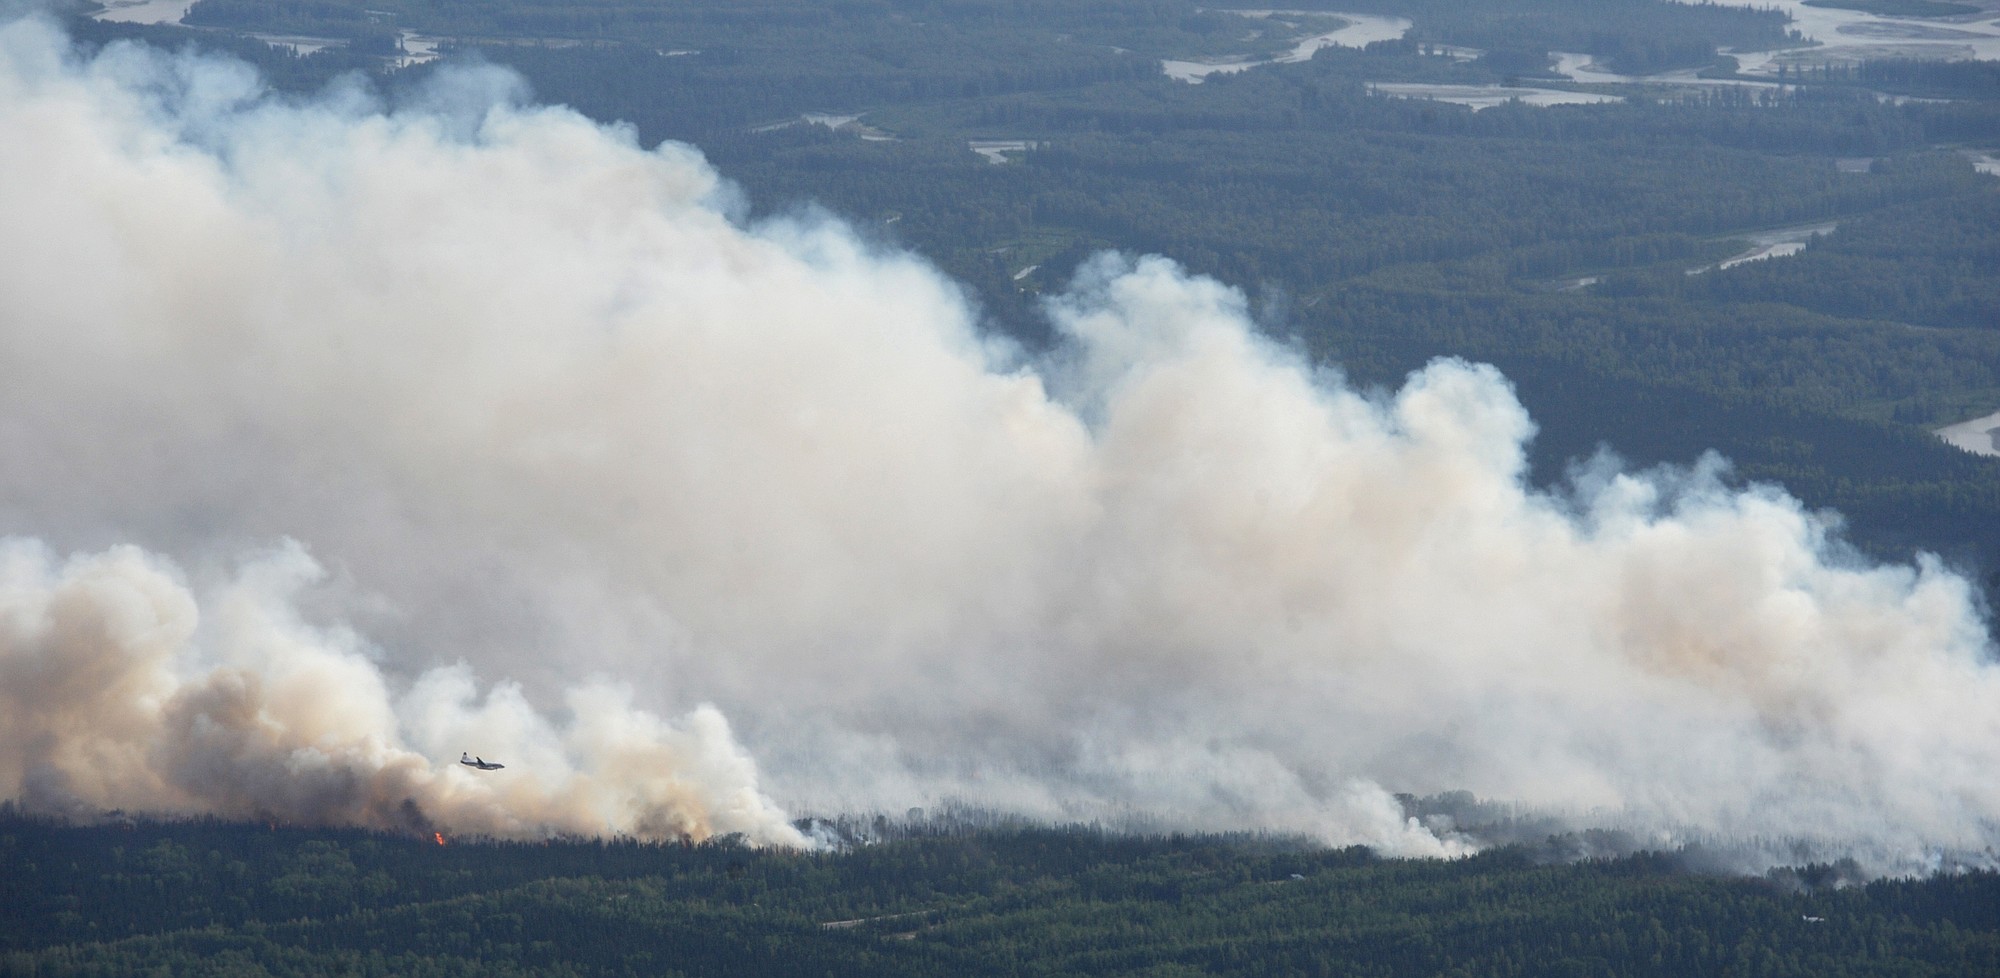 Bill Roth/Alaska Dispatch News
An Alaska State Division of Forestry air tanker works the Sockeye fire, north of Kashwitna Lake, on Sunday near Willow, Alaska. The wildfire north of Anchorage closed a key highway and forced the evacuation of 1,700 homes.